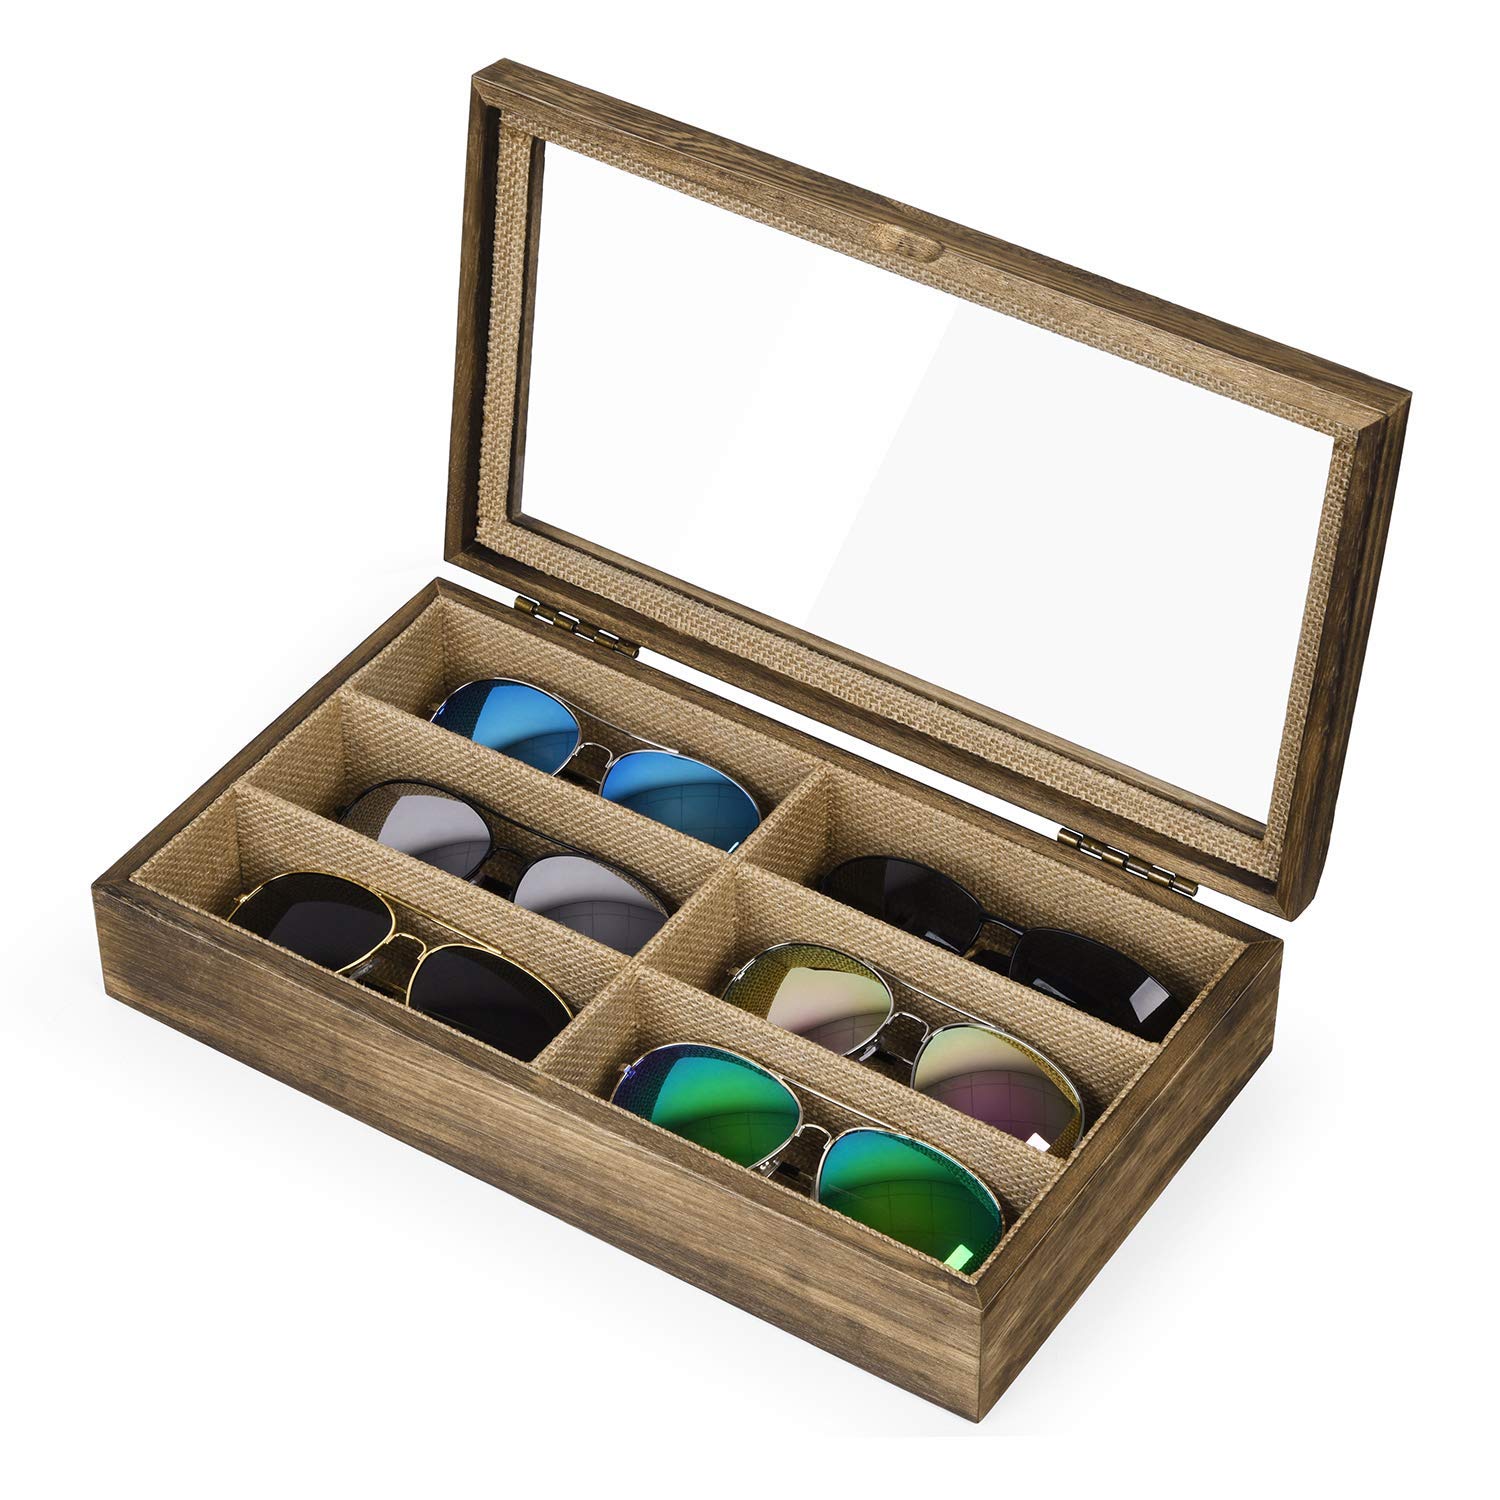 SRIWATANA Watch Box Case 6 Slot and Sunglasses Organizer for Women Men, Vintage Style (Contains 2 Items)